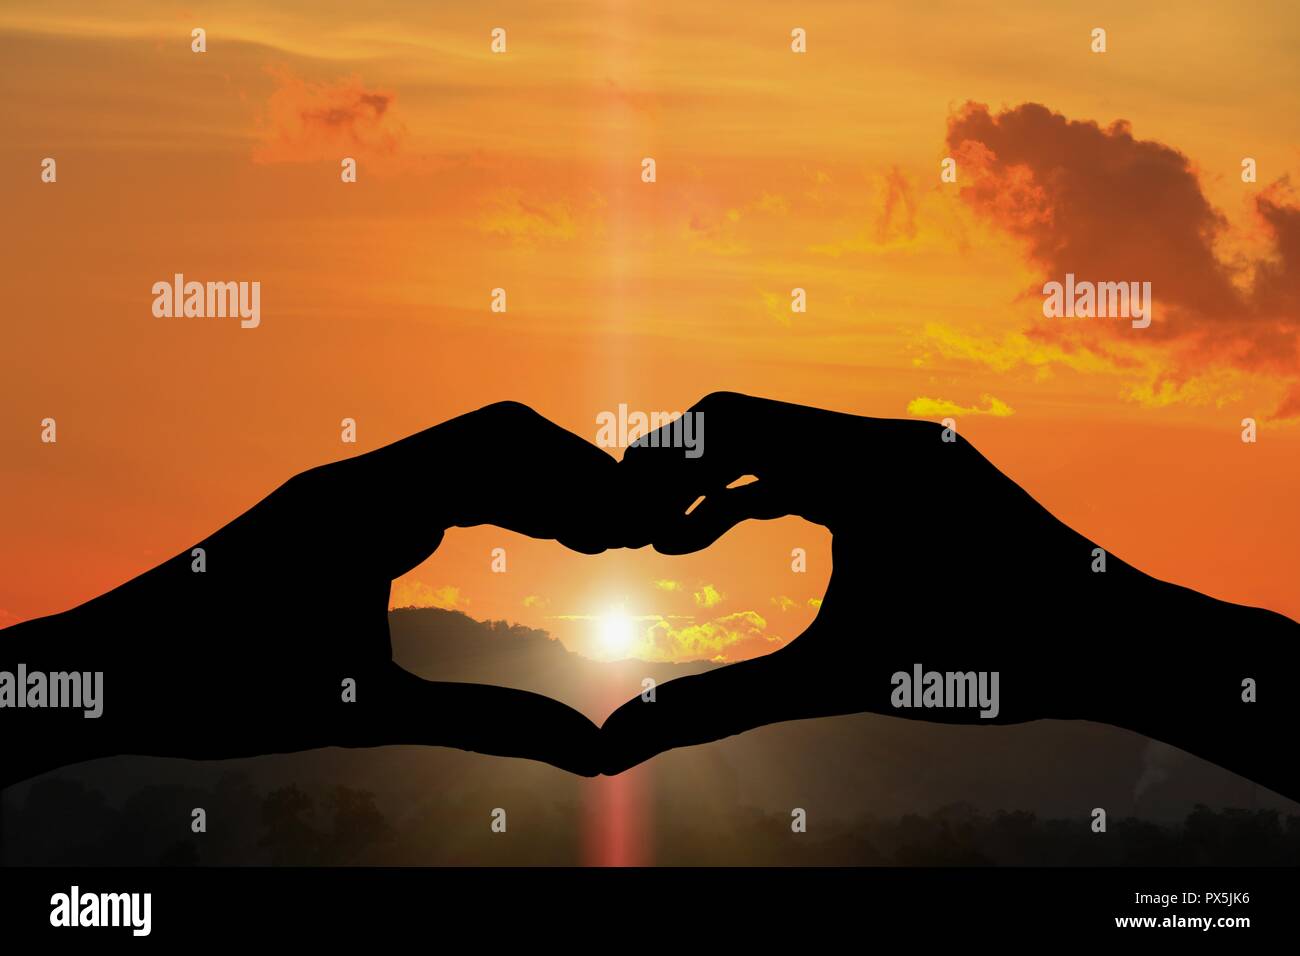 hand forming silhouette a heart shape with  sunset  light Stock Photo